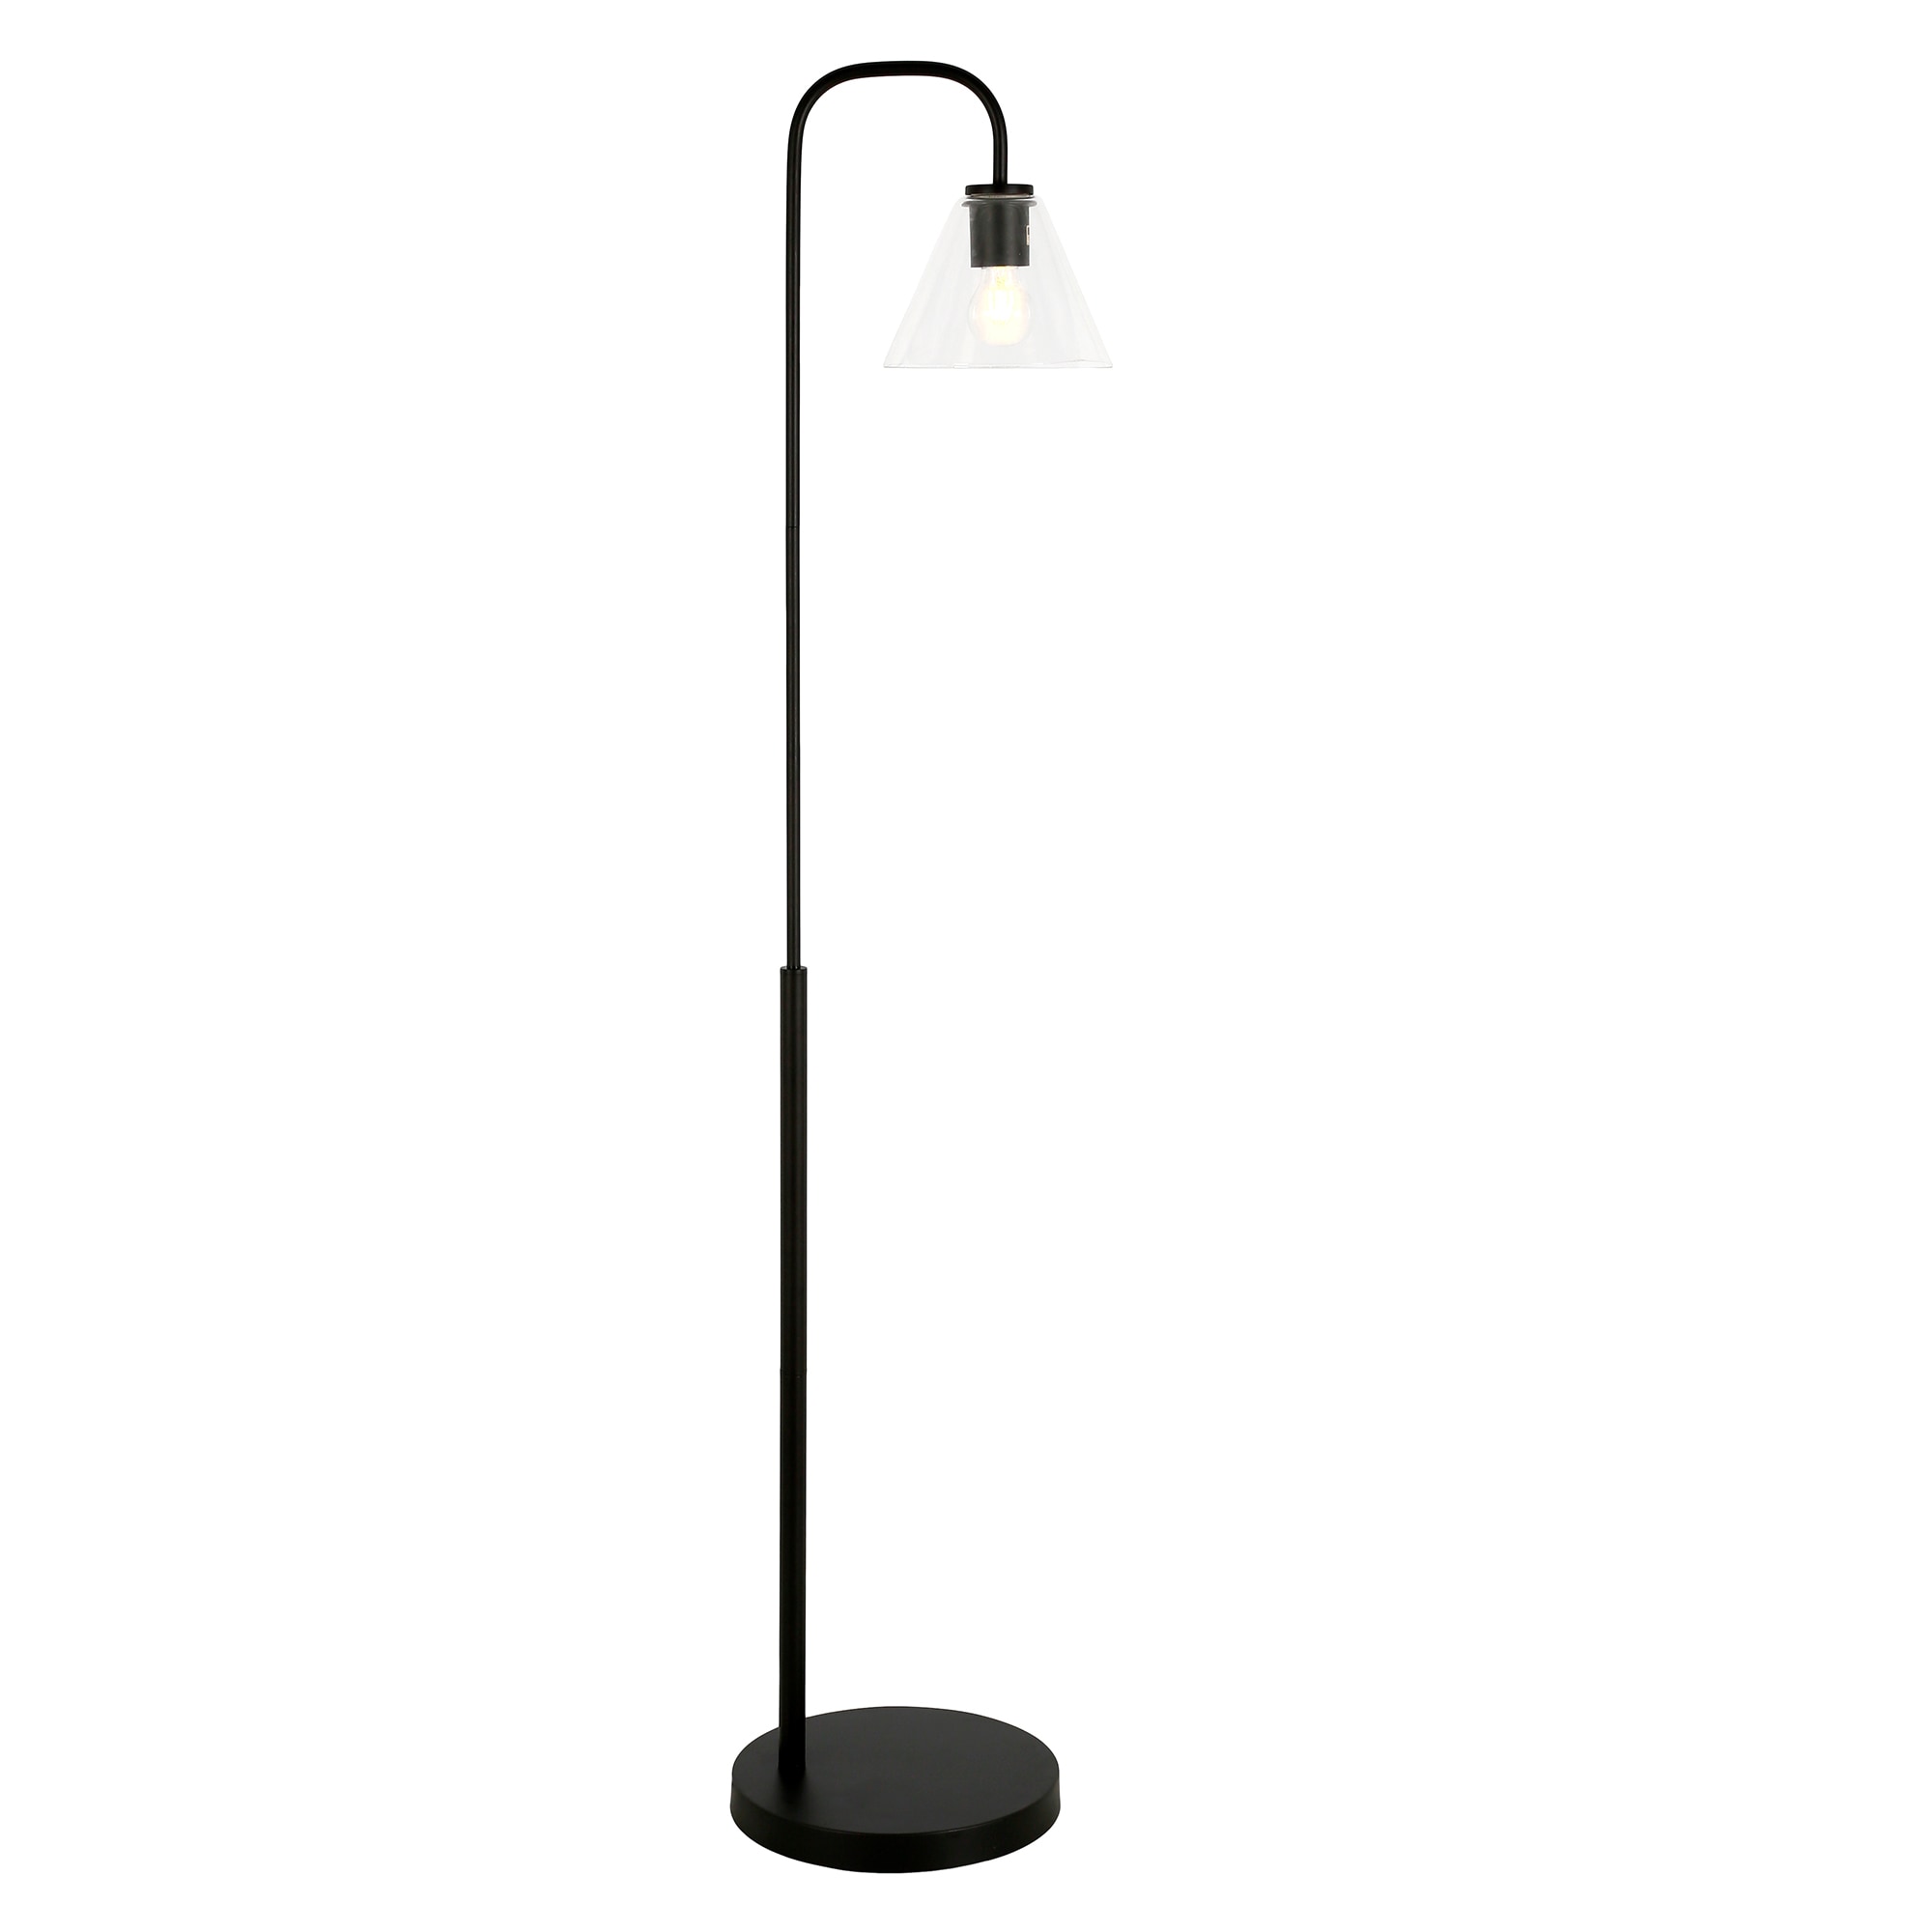 Hailey Home Henderson 62-in Blackened Bronze Floor Lamp at Lowes.com